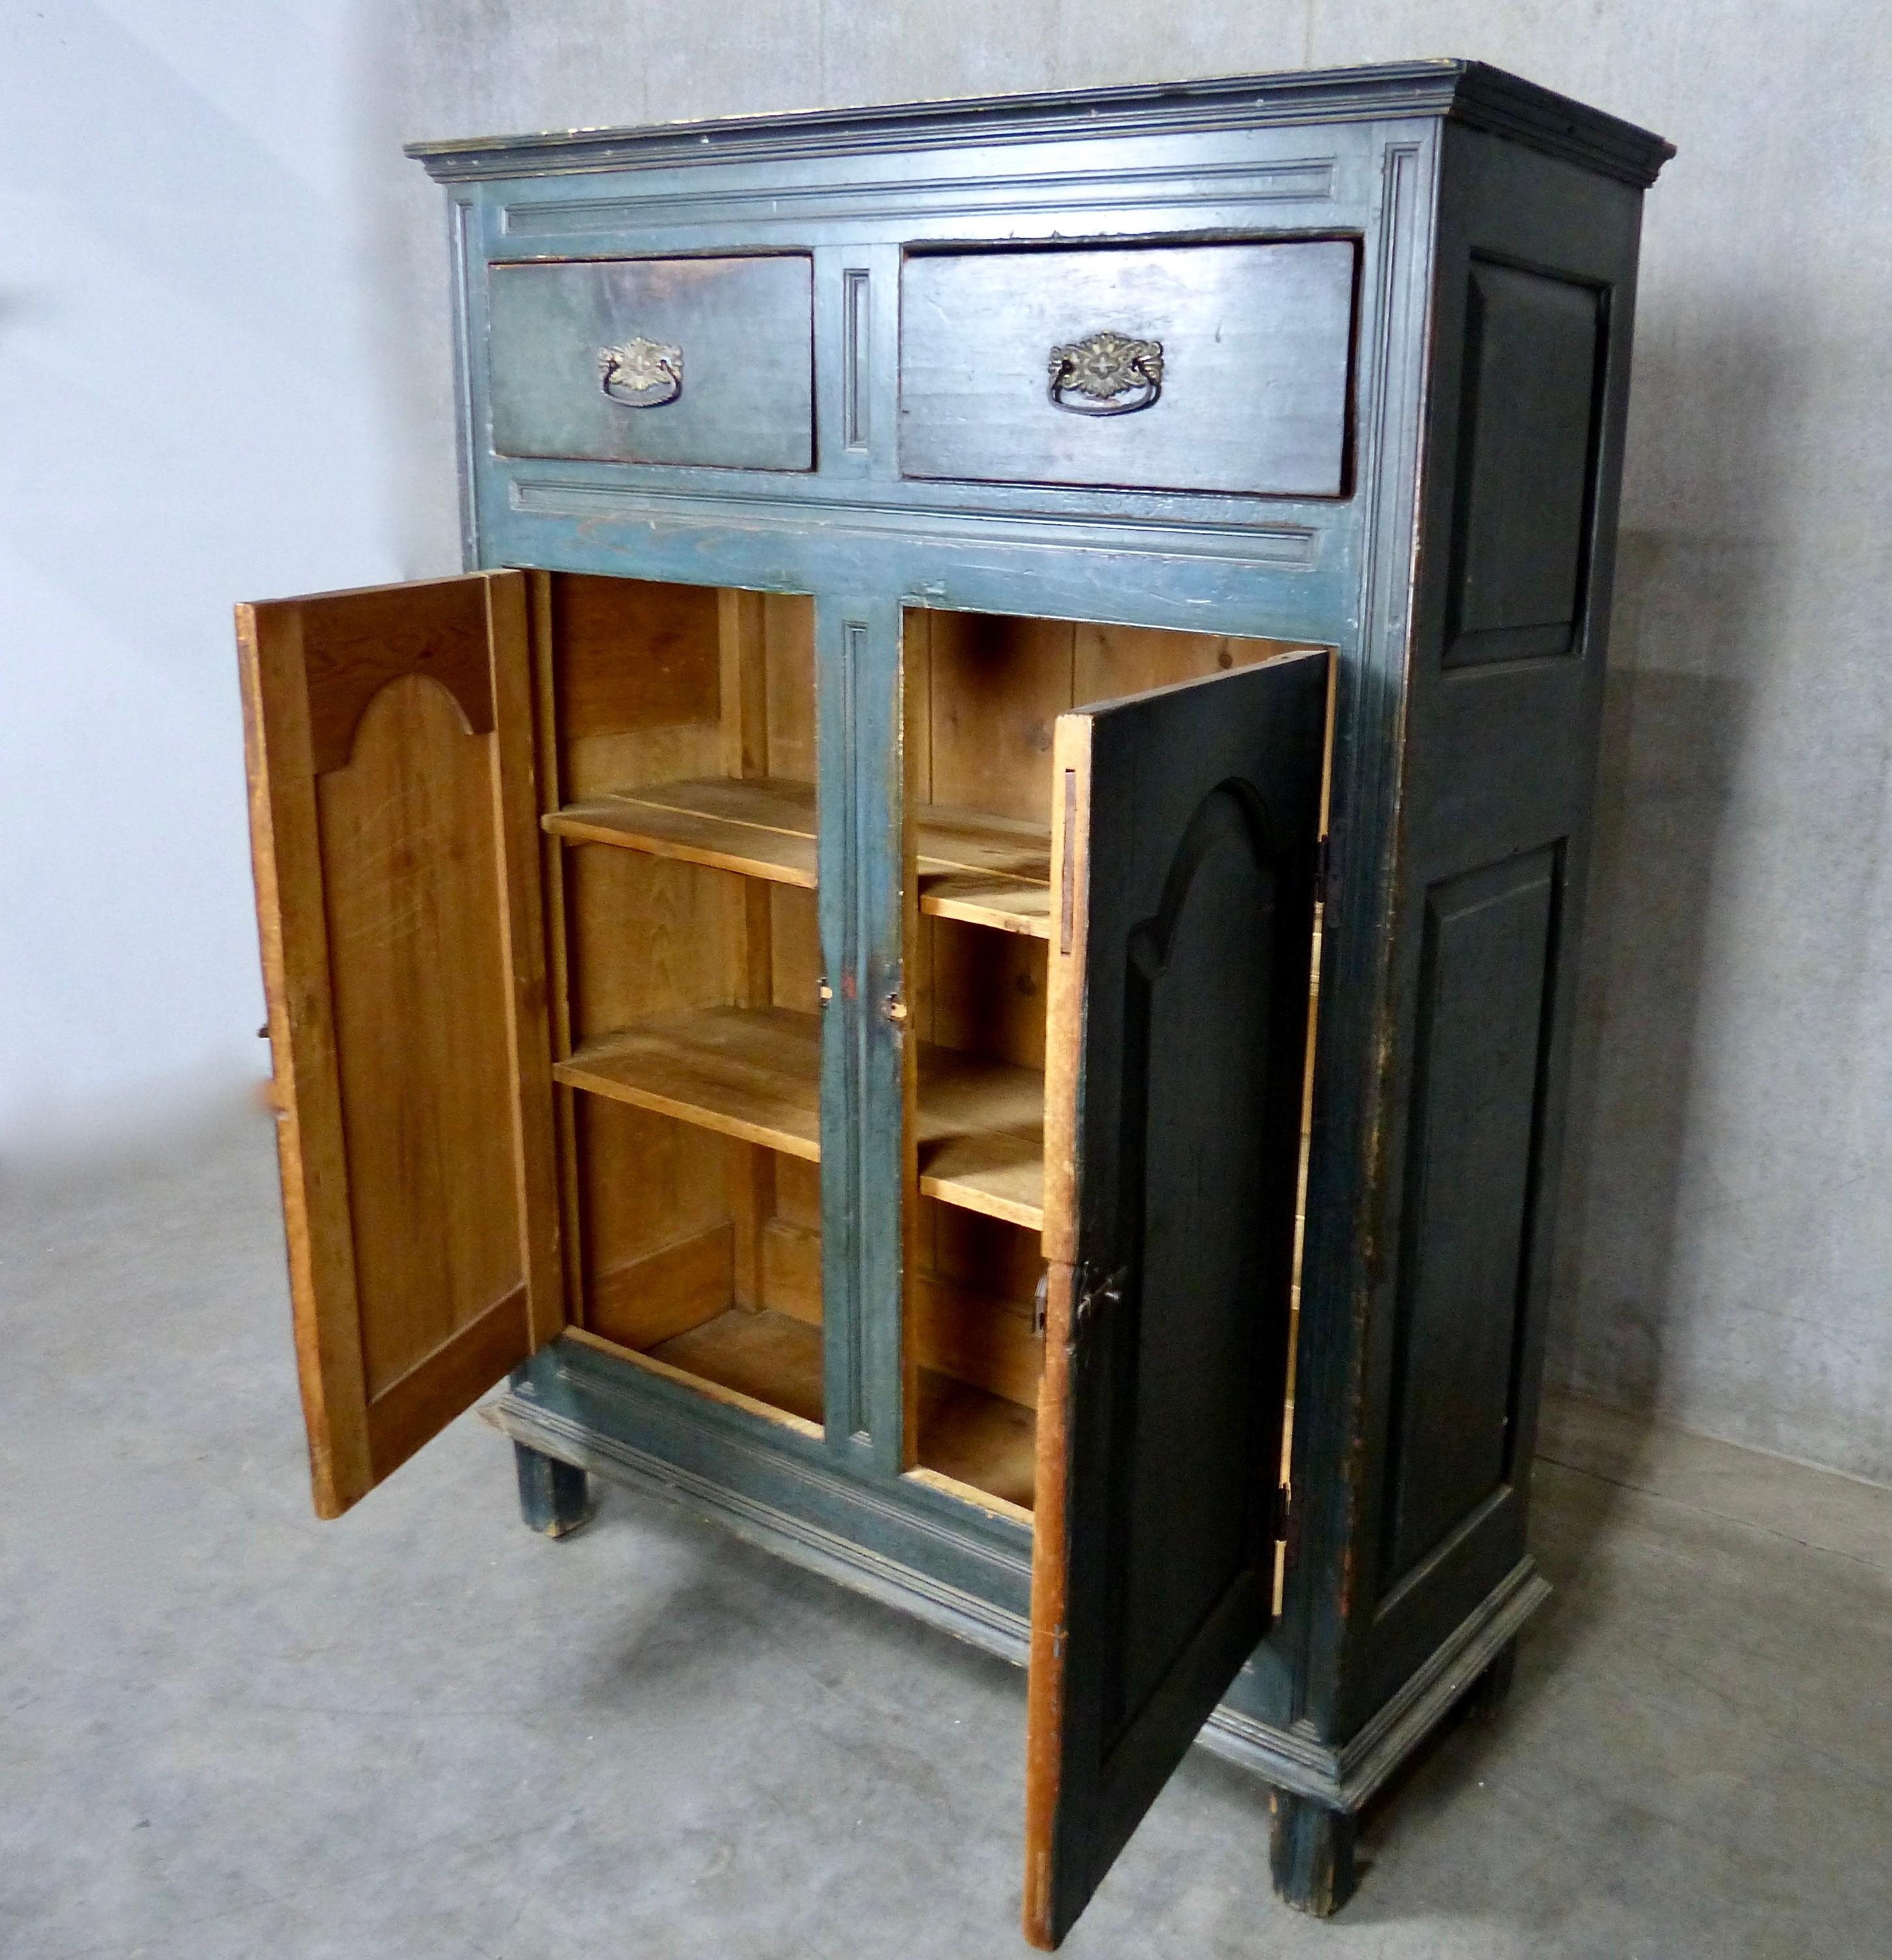 A rare and early, teal blue Quebec painted pine cabinet from circa 1800-1810. Two deep upper drawers along with three shelves behind doors on the lower portion. Original surface paint and original hardware. Handcrafted wood is nicely detailed